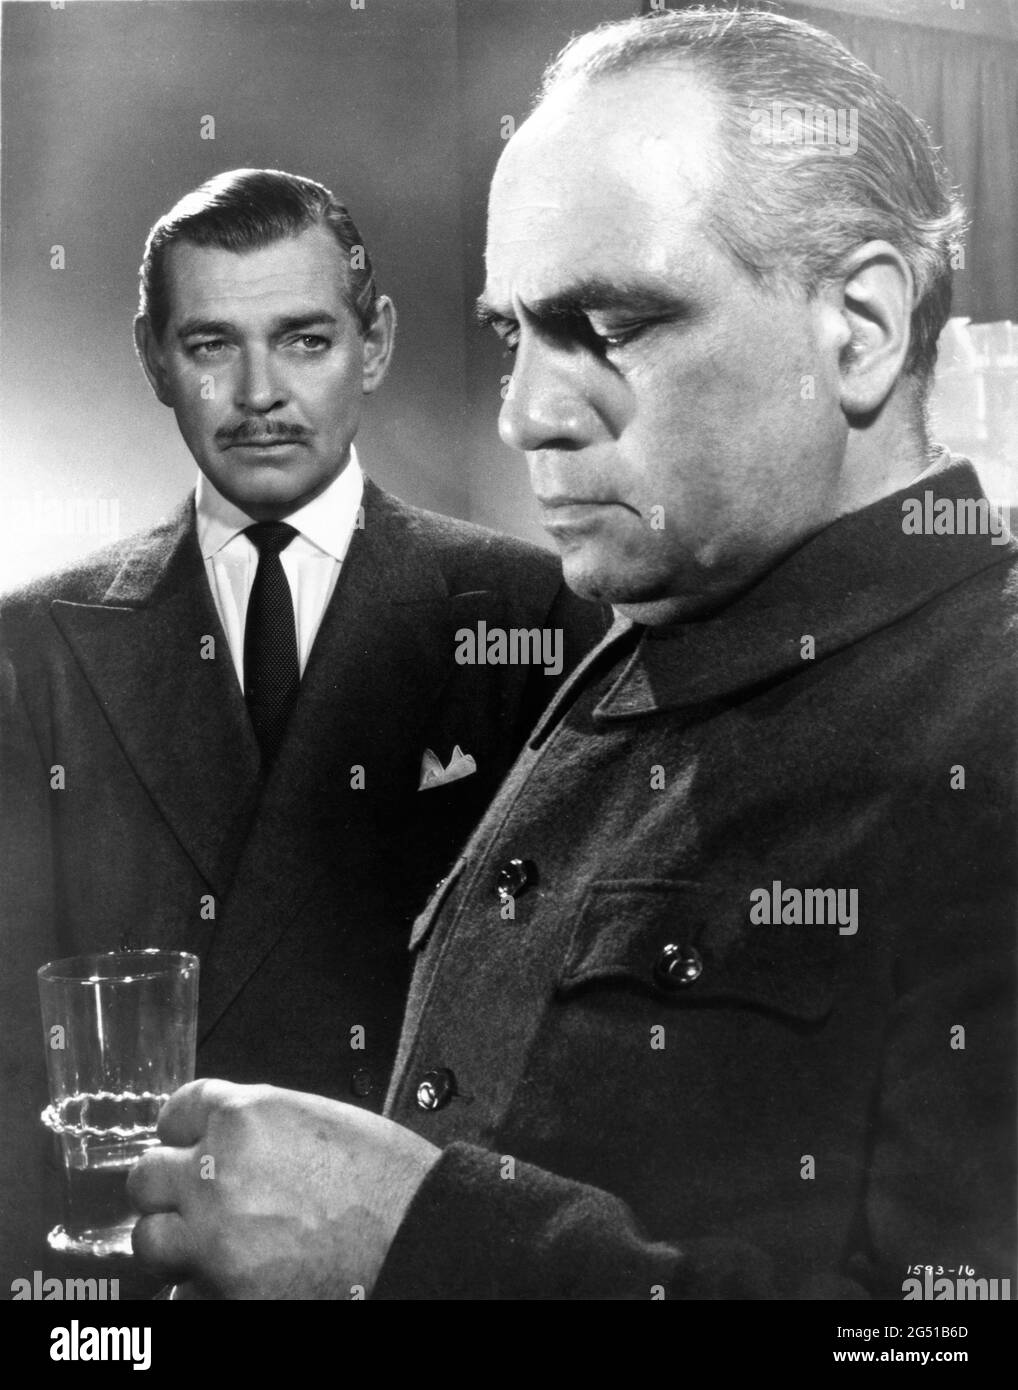 CLARK GABLE and KAREL STEPANEK in NEVER LET ME GO 1953 director DELMER DAVES from novel Come The Dawn by Paul Winterton producer Clarence Brown Metro Goldwyn Mayer Stock Photo